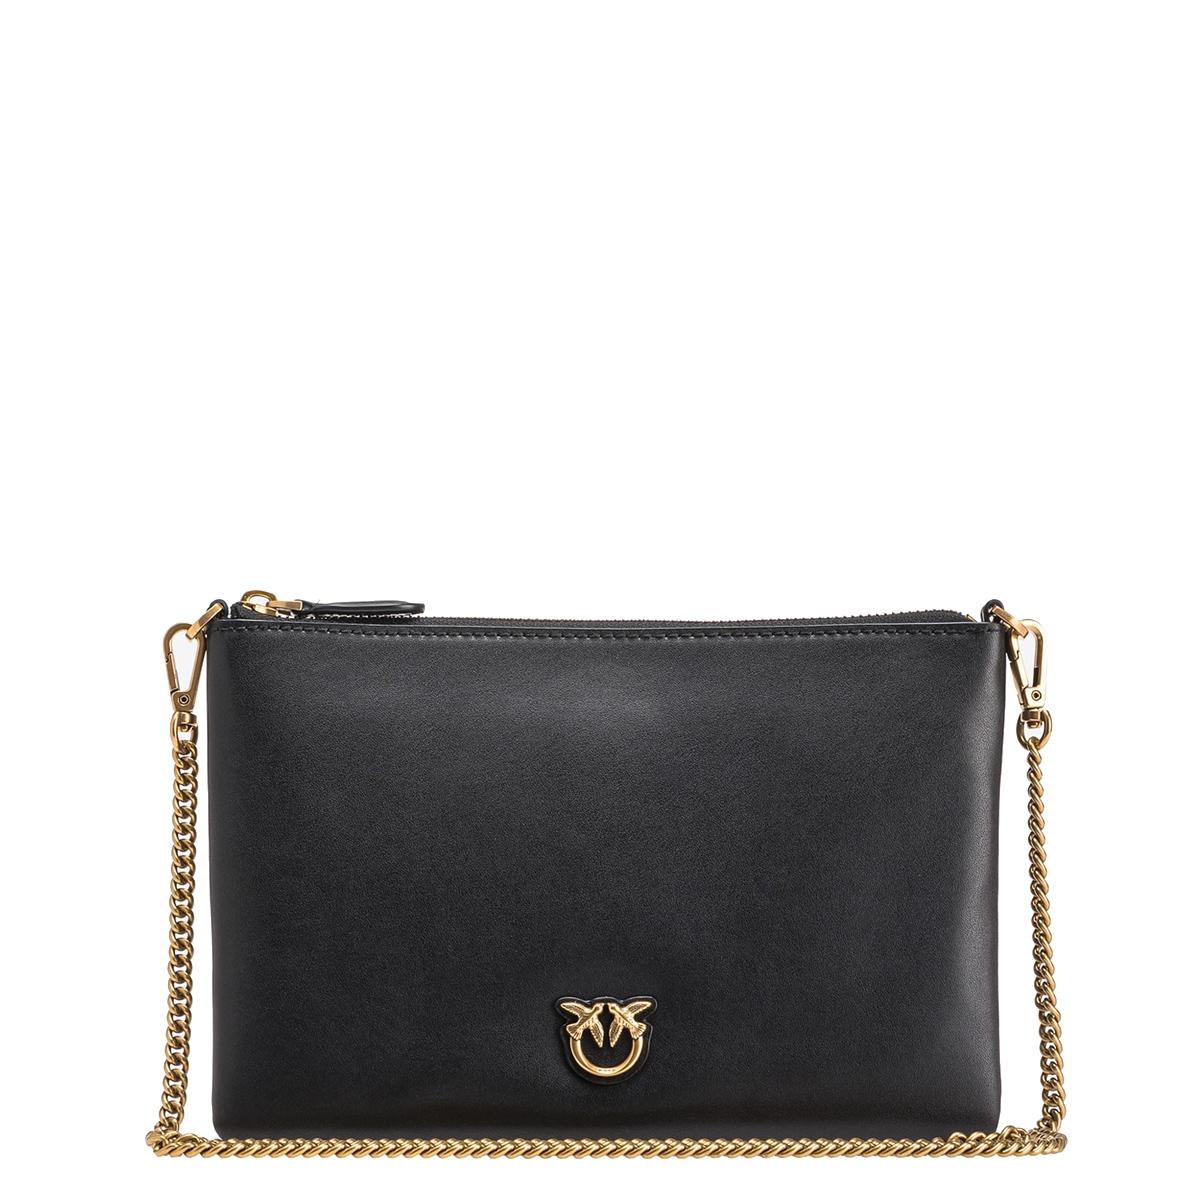 Bulgari Serpenti Forever Black Leather Chain Wallet at FORZIERI